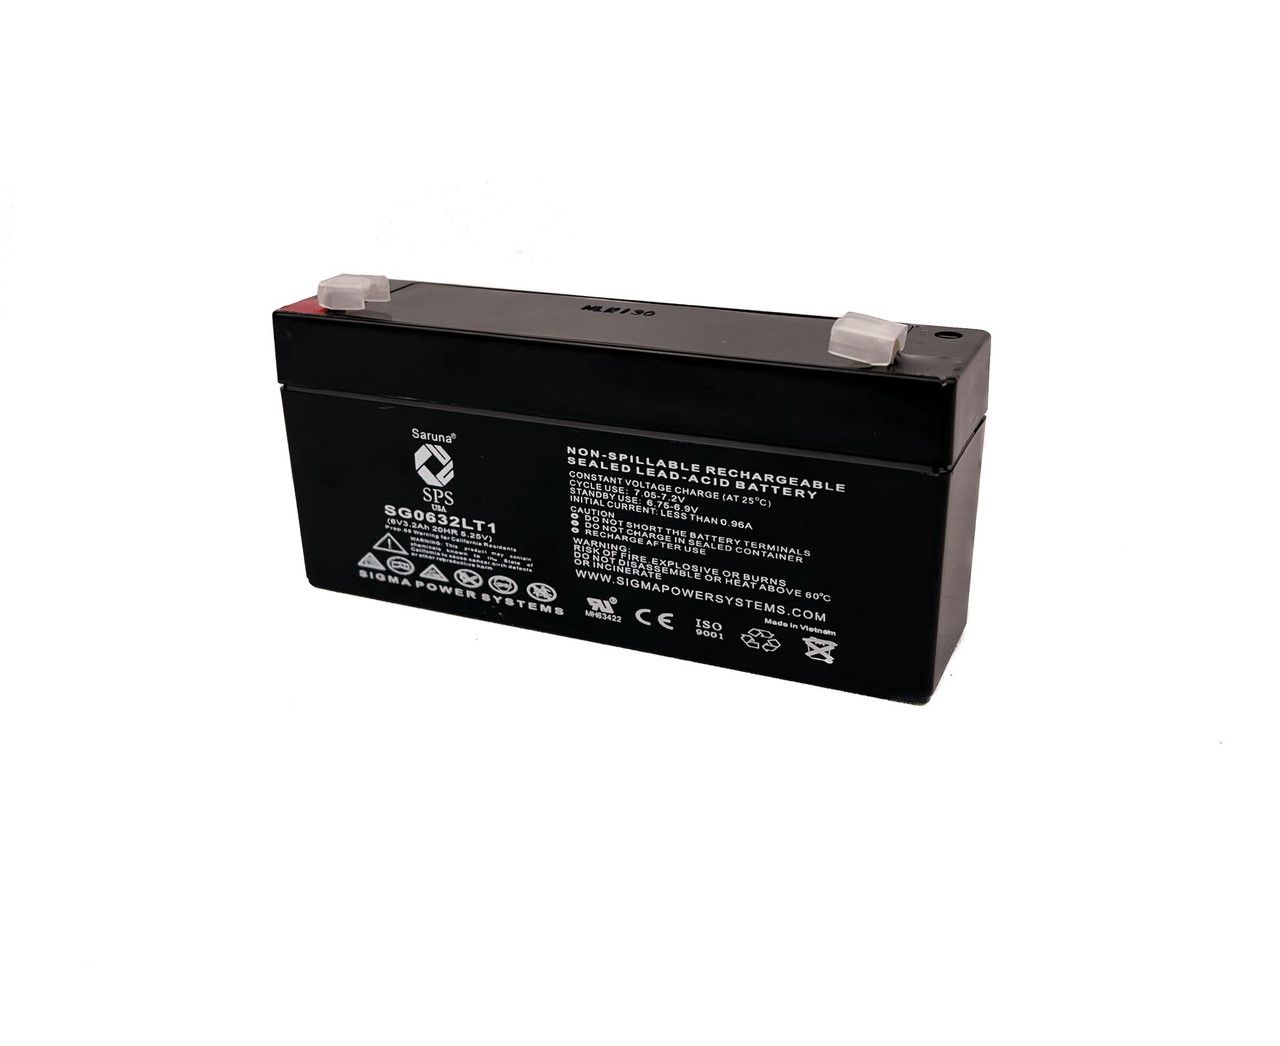 Raion Power RG0632LT1 Replacement UPS Battery for HP ELECTRO CARDIOGRAF